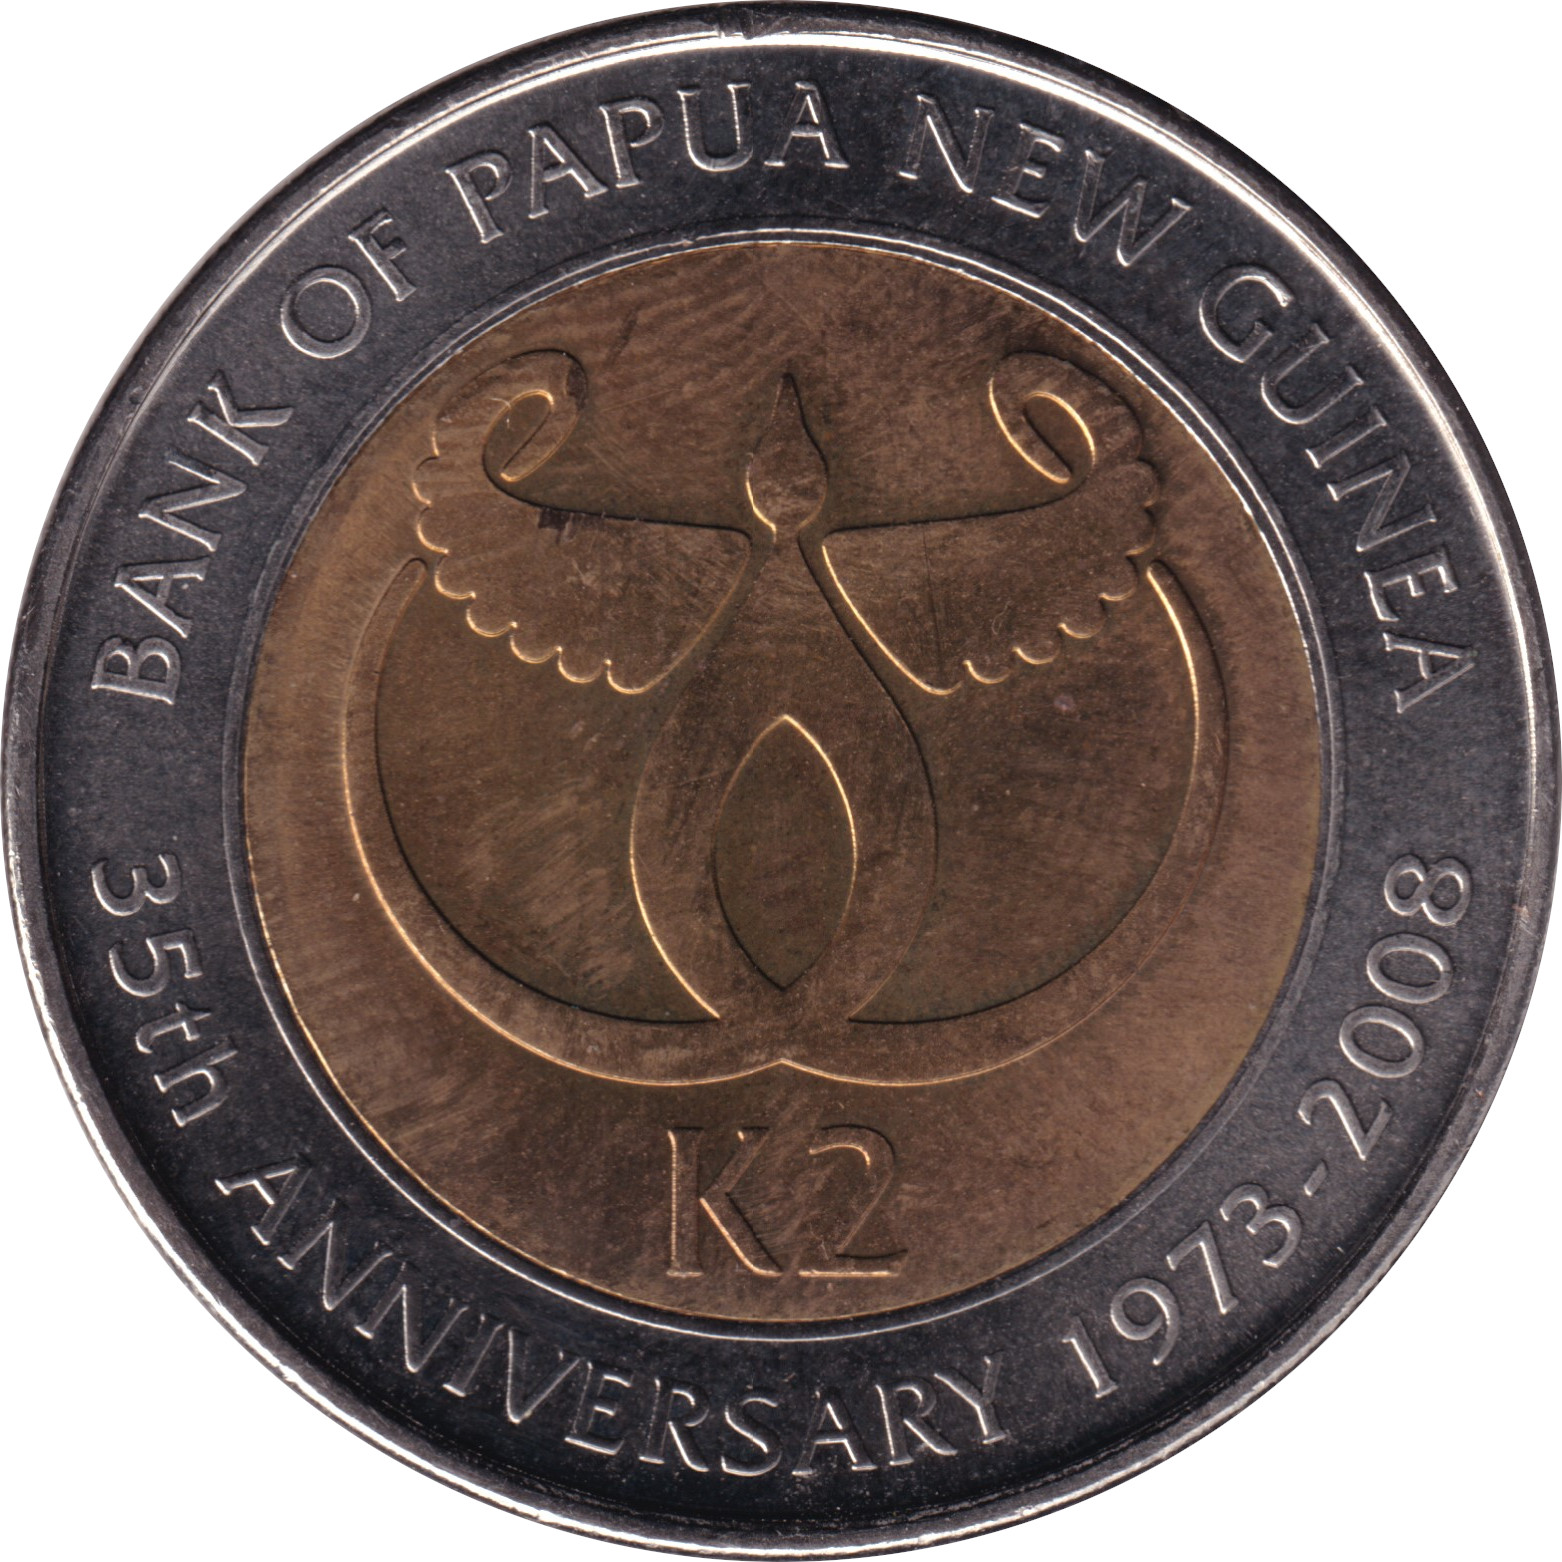 2 kina - Banque de Papouasie - 35 years